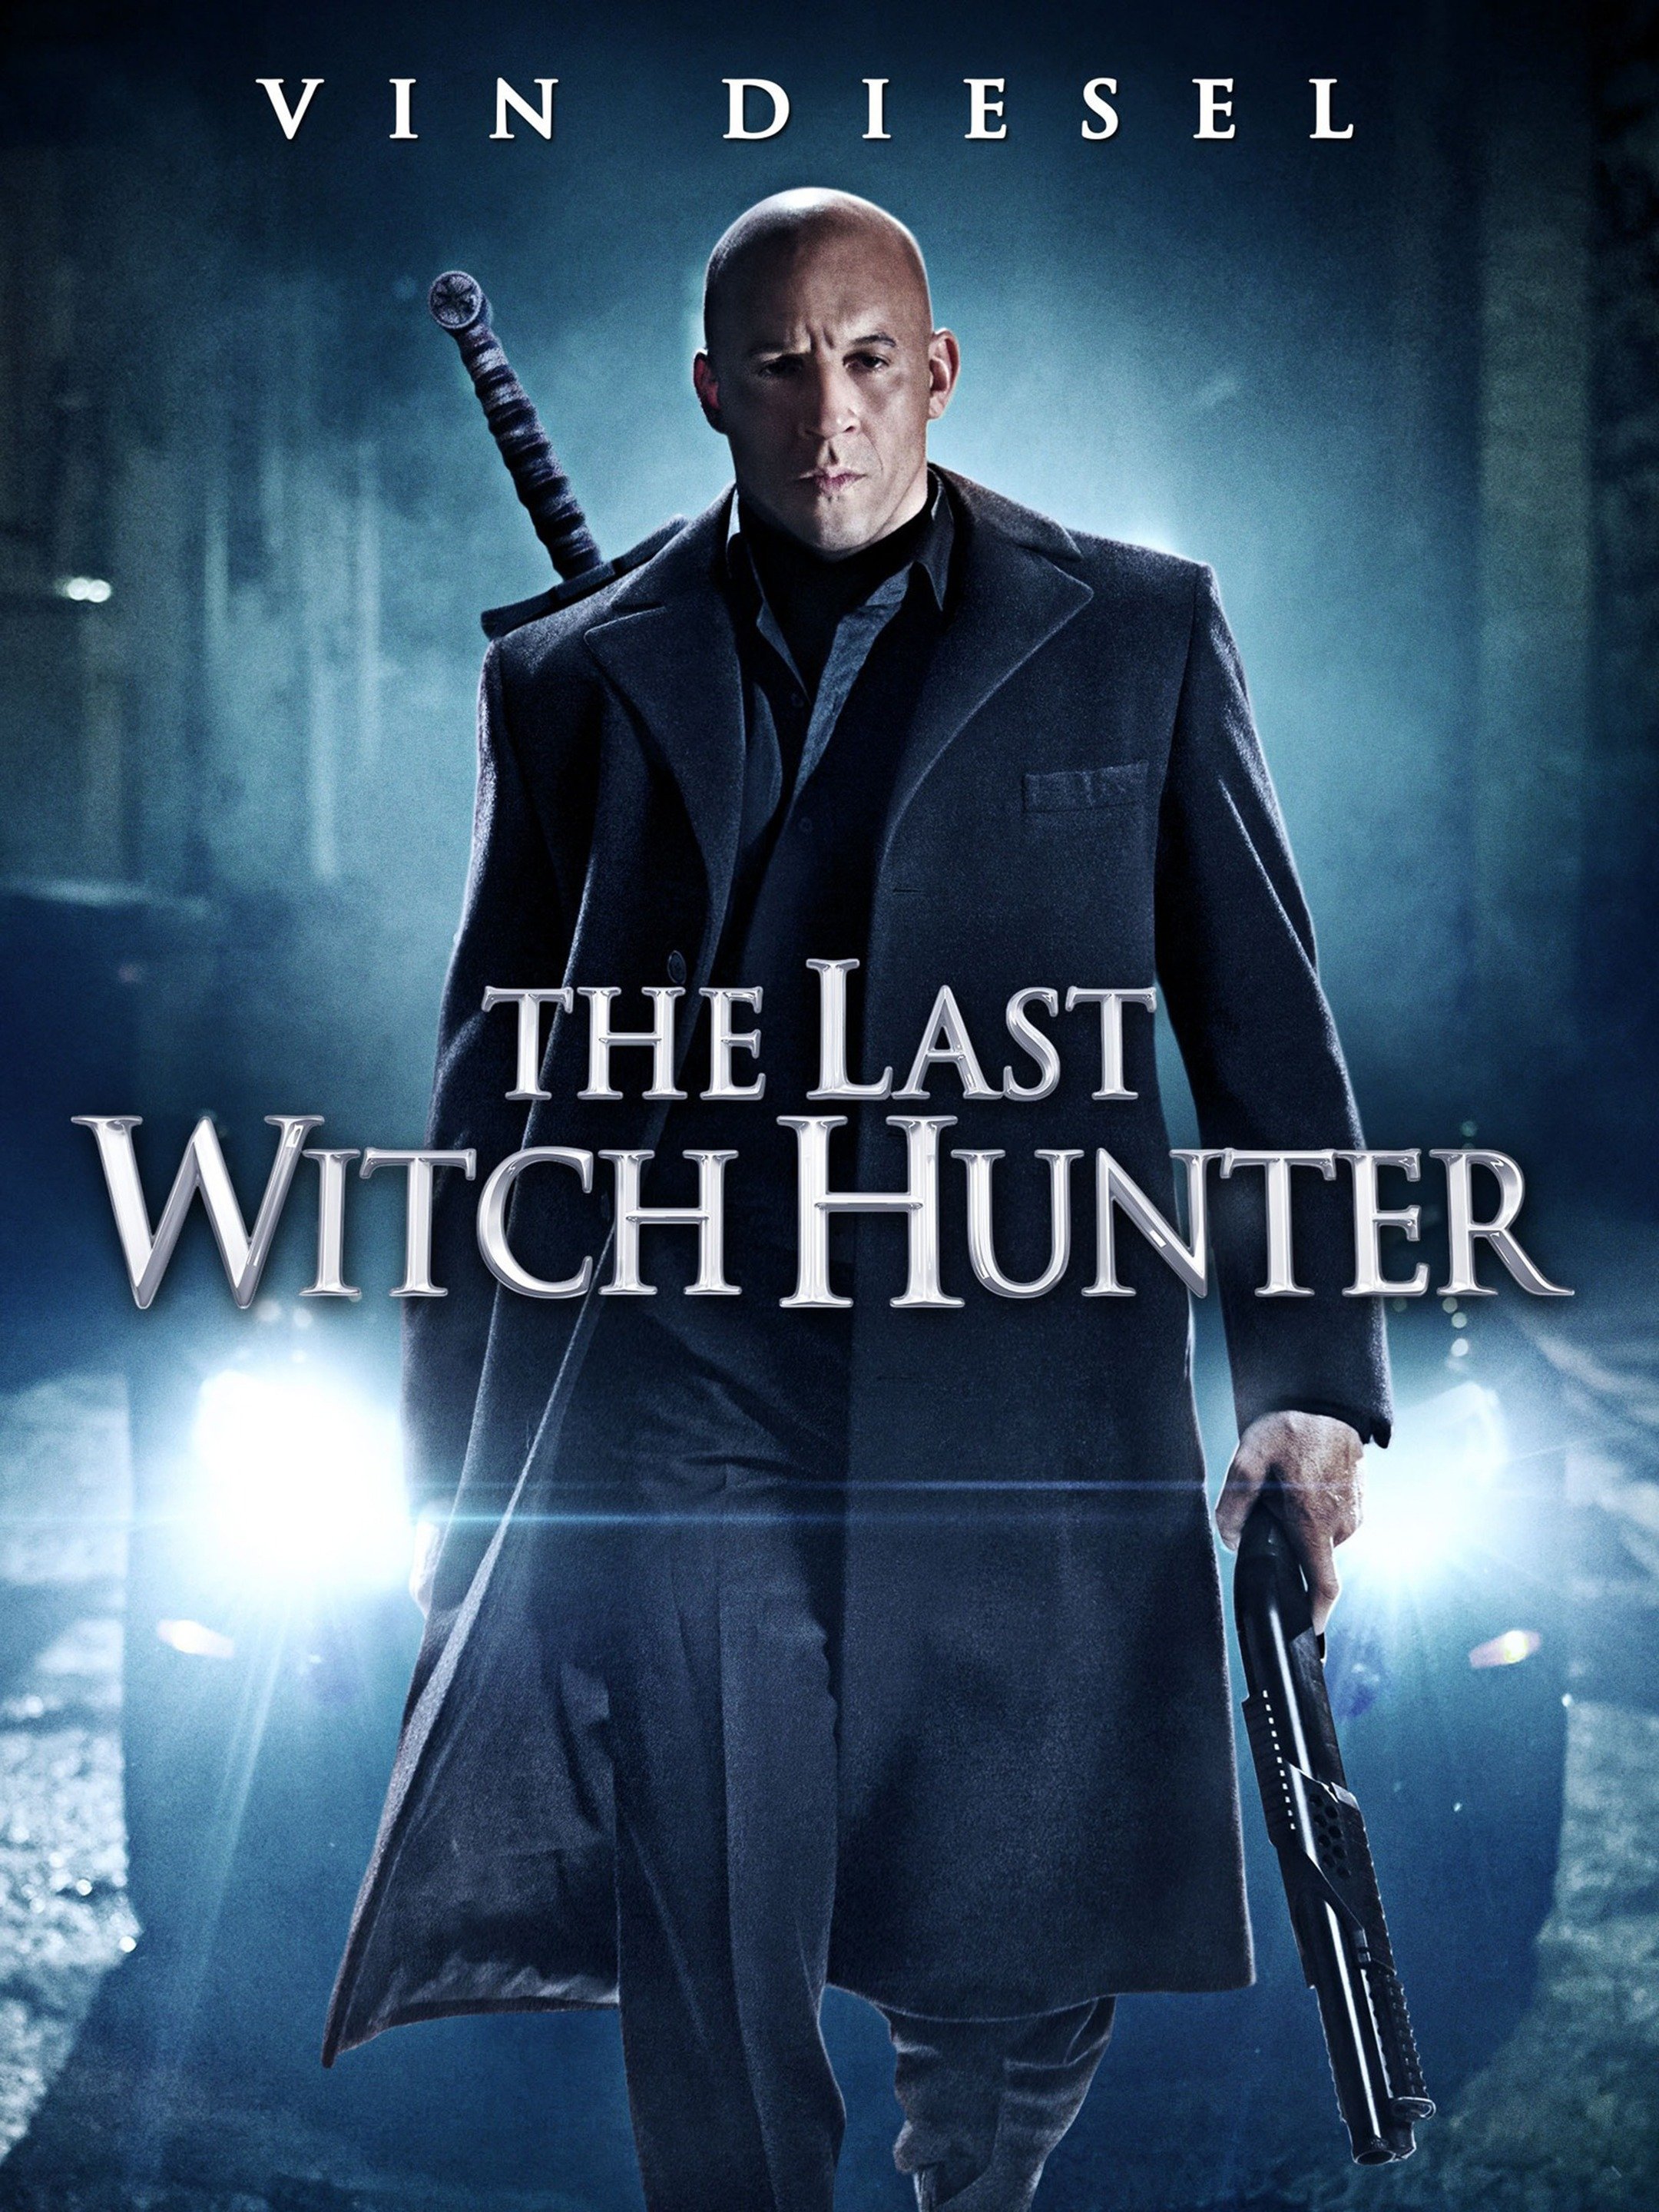 is the movie the last witch hunter based on a book